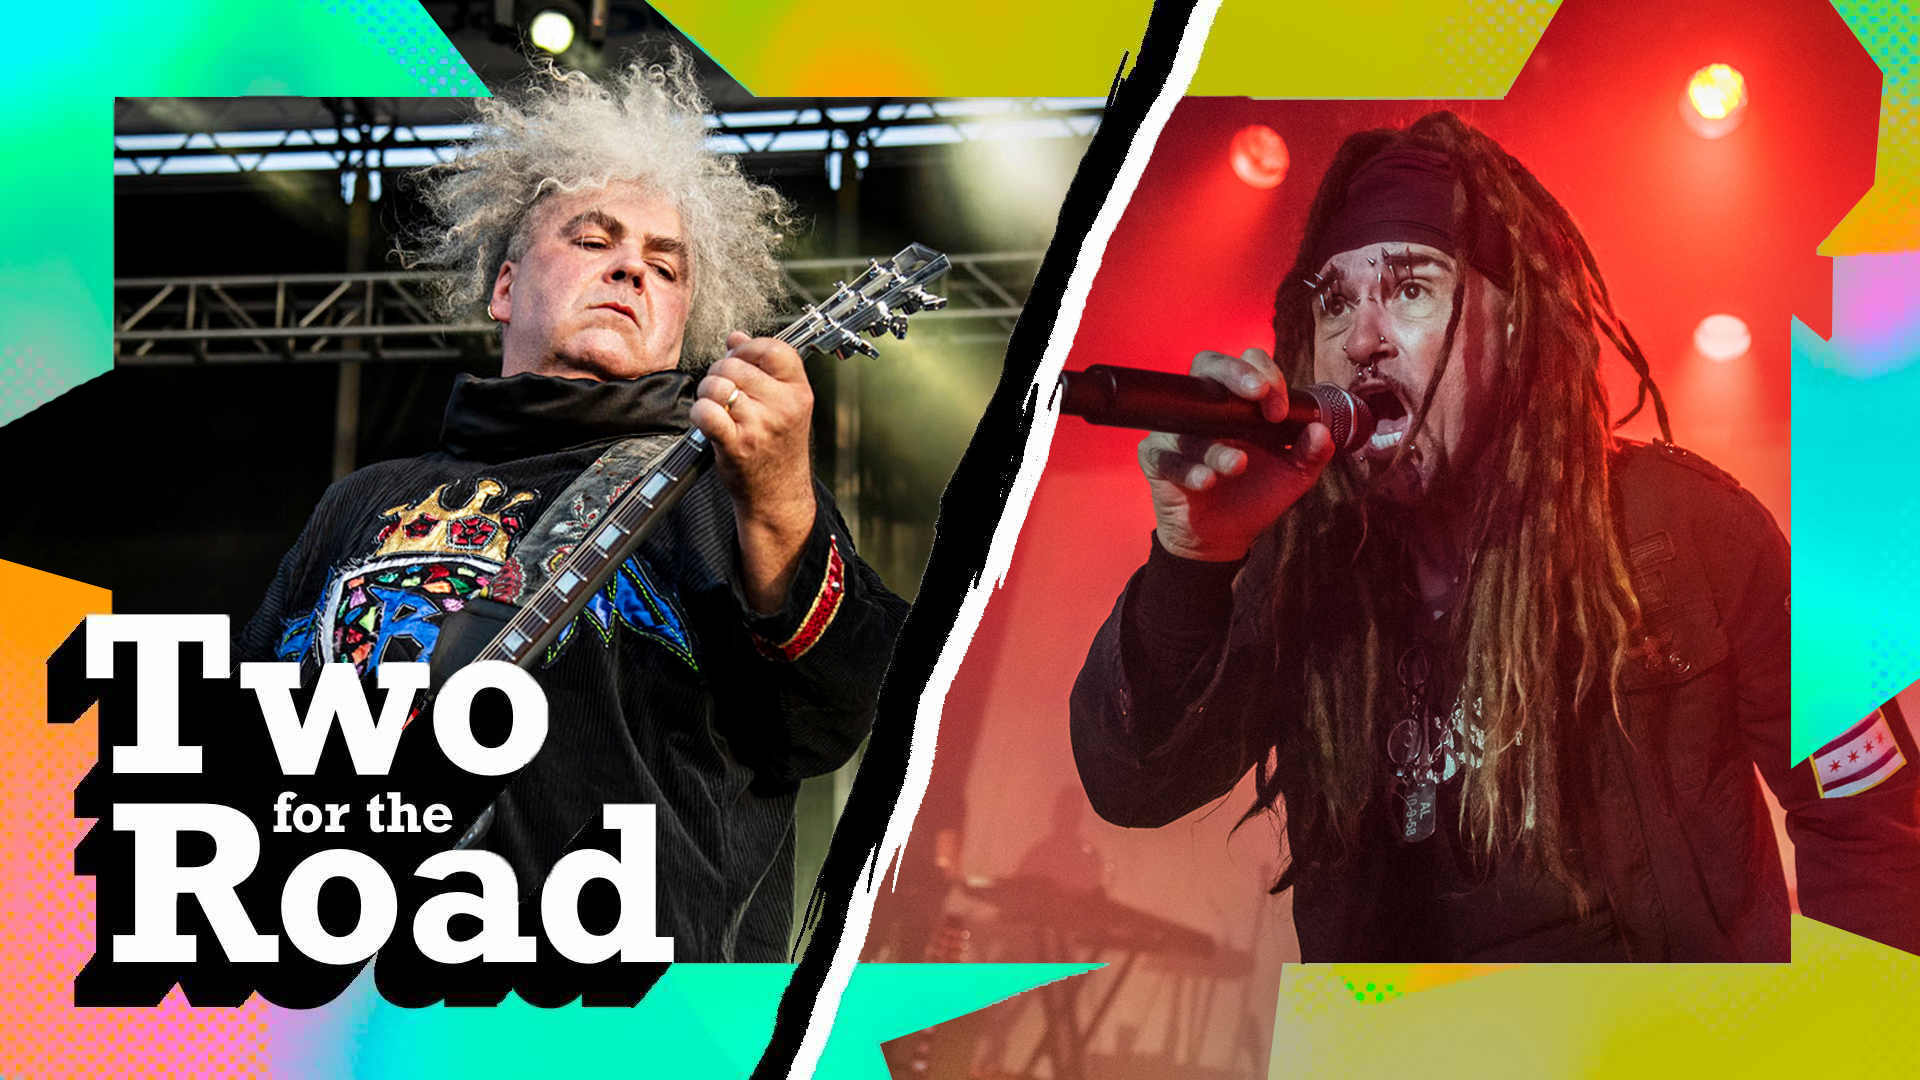 Two for the Road: Ministry's Al Jourgensen and Melvins' Buzz Osborne Talk Life on Tour